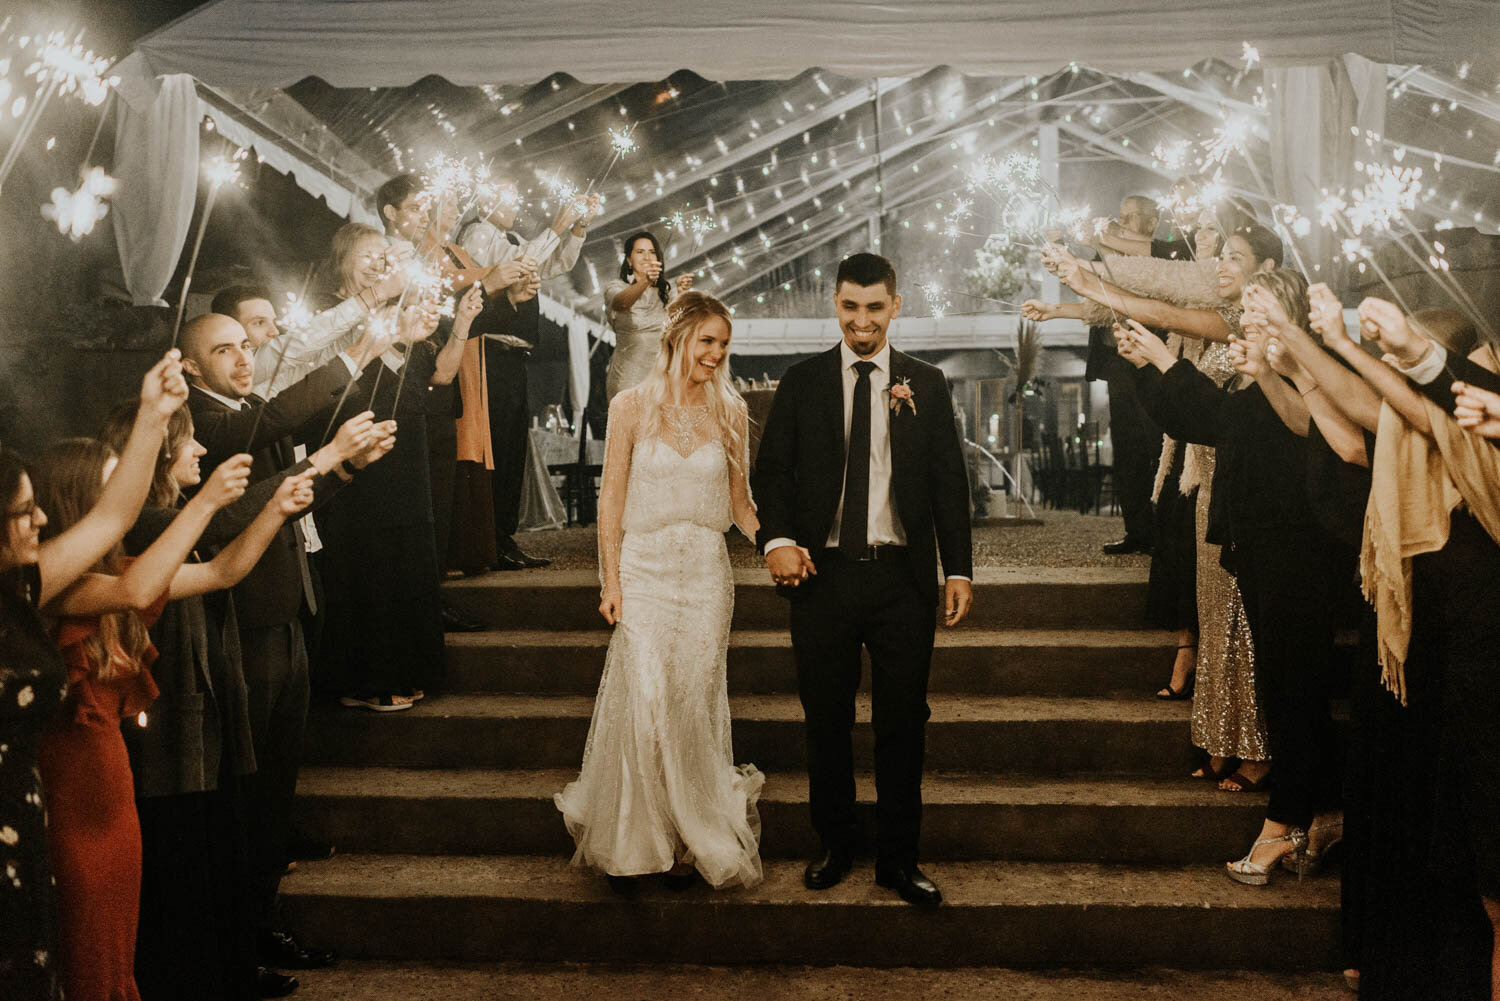 Hotel Domestique Intimate Wedding Photography sparklers exit photos